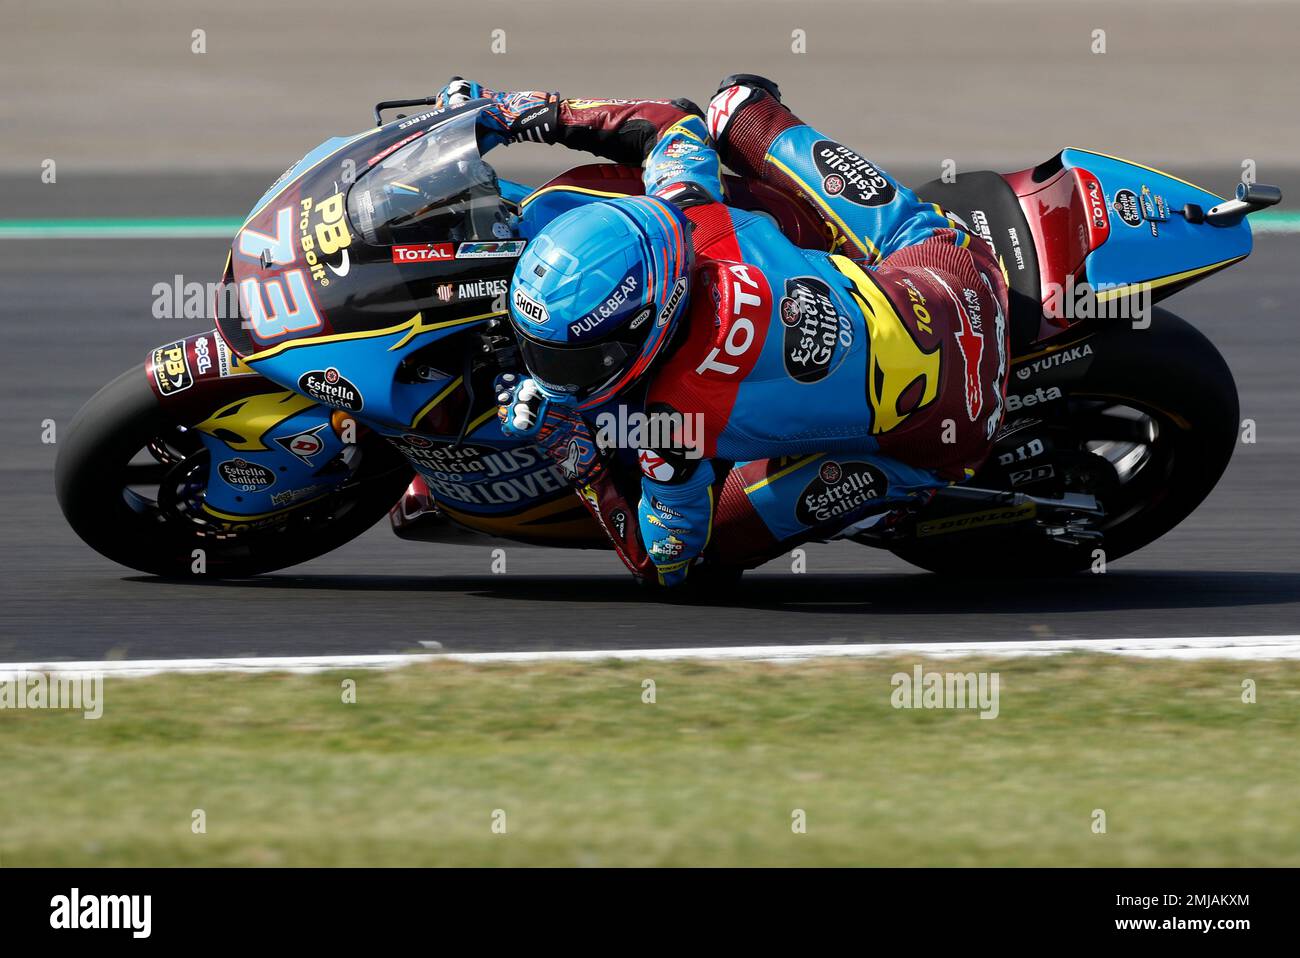 Spain's rider Alex Marquez of the EG 0,0 Marc VDS steers his motorcycle  during the Moto2 race at the British Motorcycle Grand Prix at the  Silverstone racetrack, in Silverstone, England, Sunday, Aug.